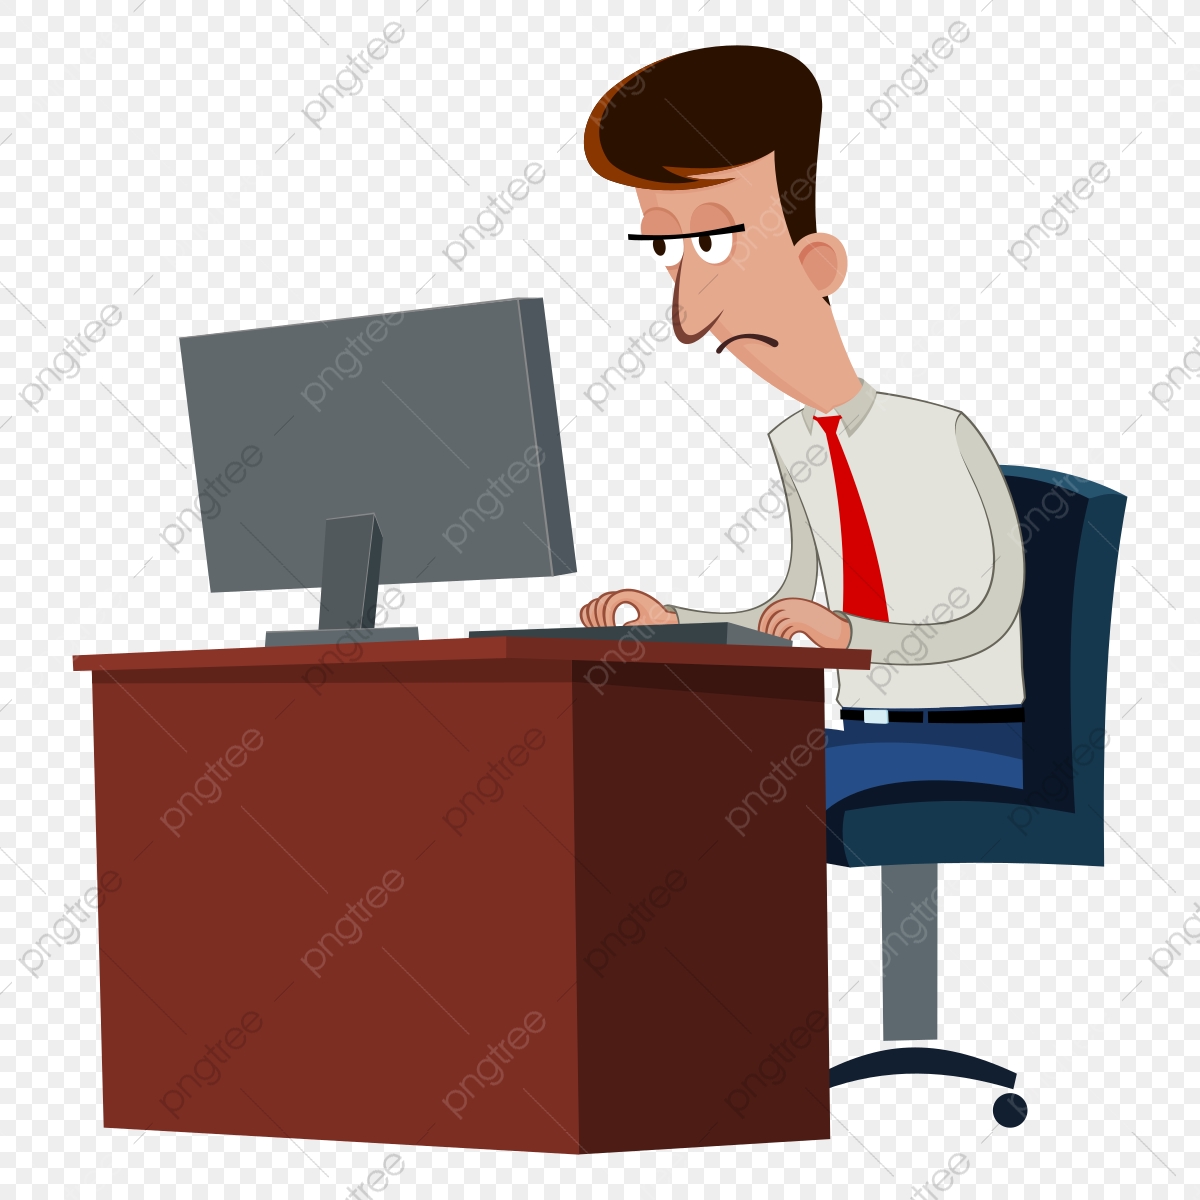 tired clipart computer job